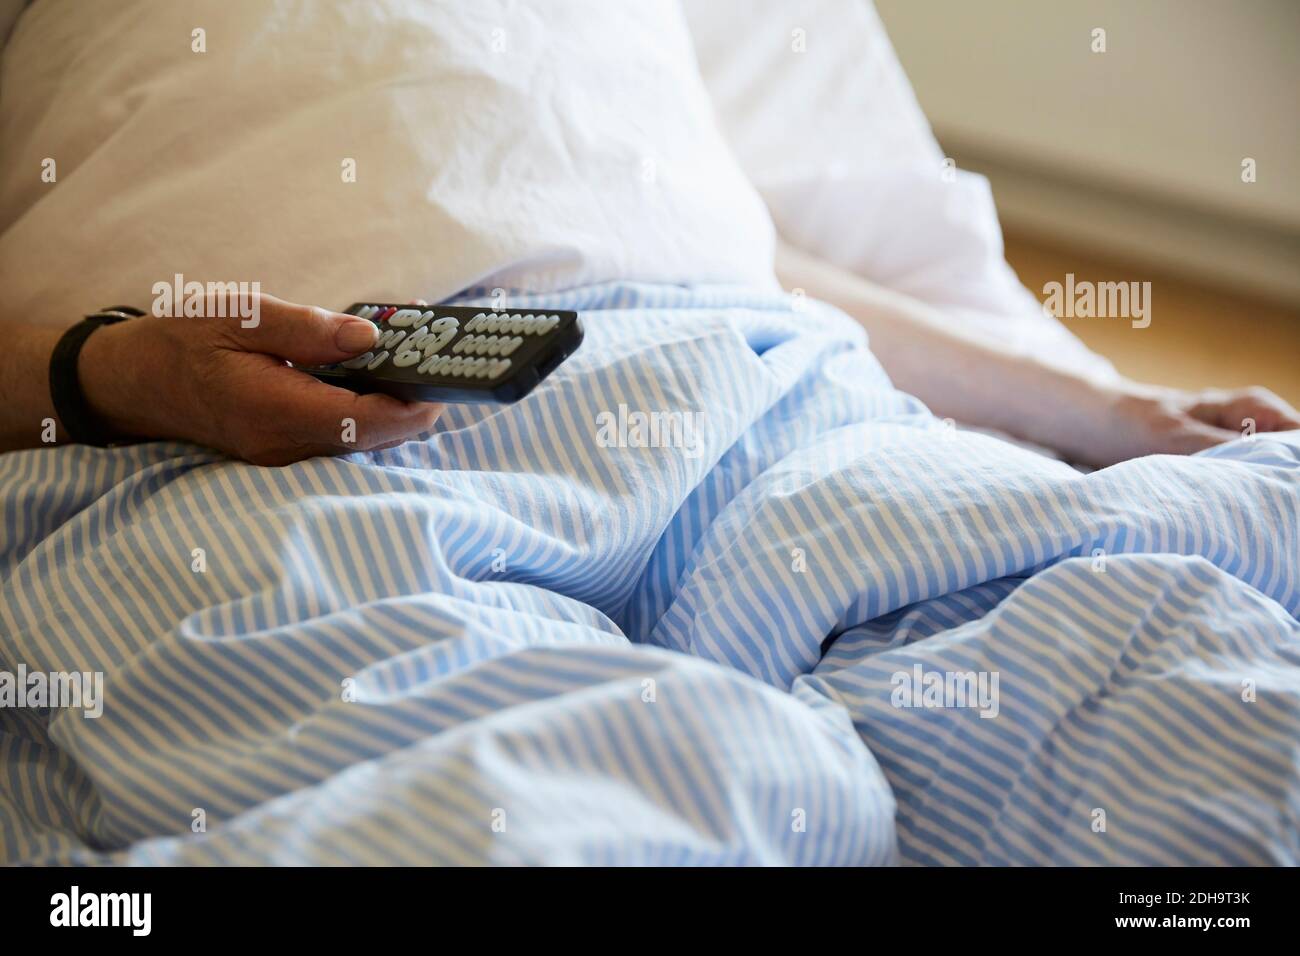 Midsection of senior man using remote control on hospital bed Stock Photo